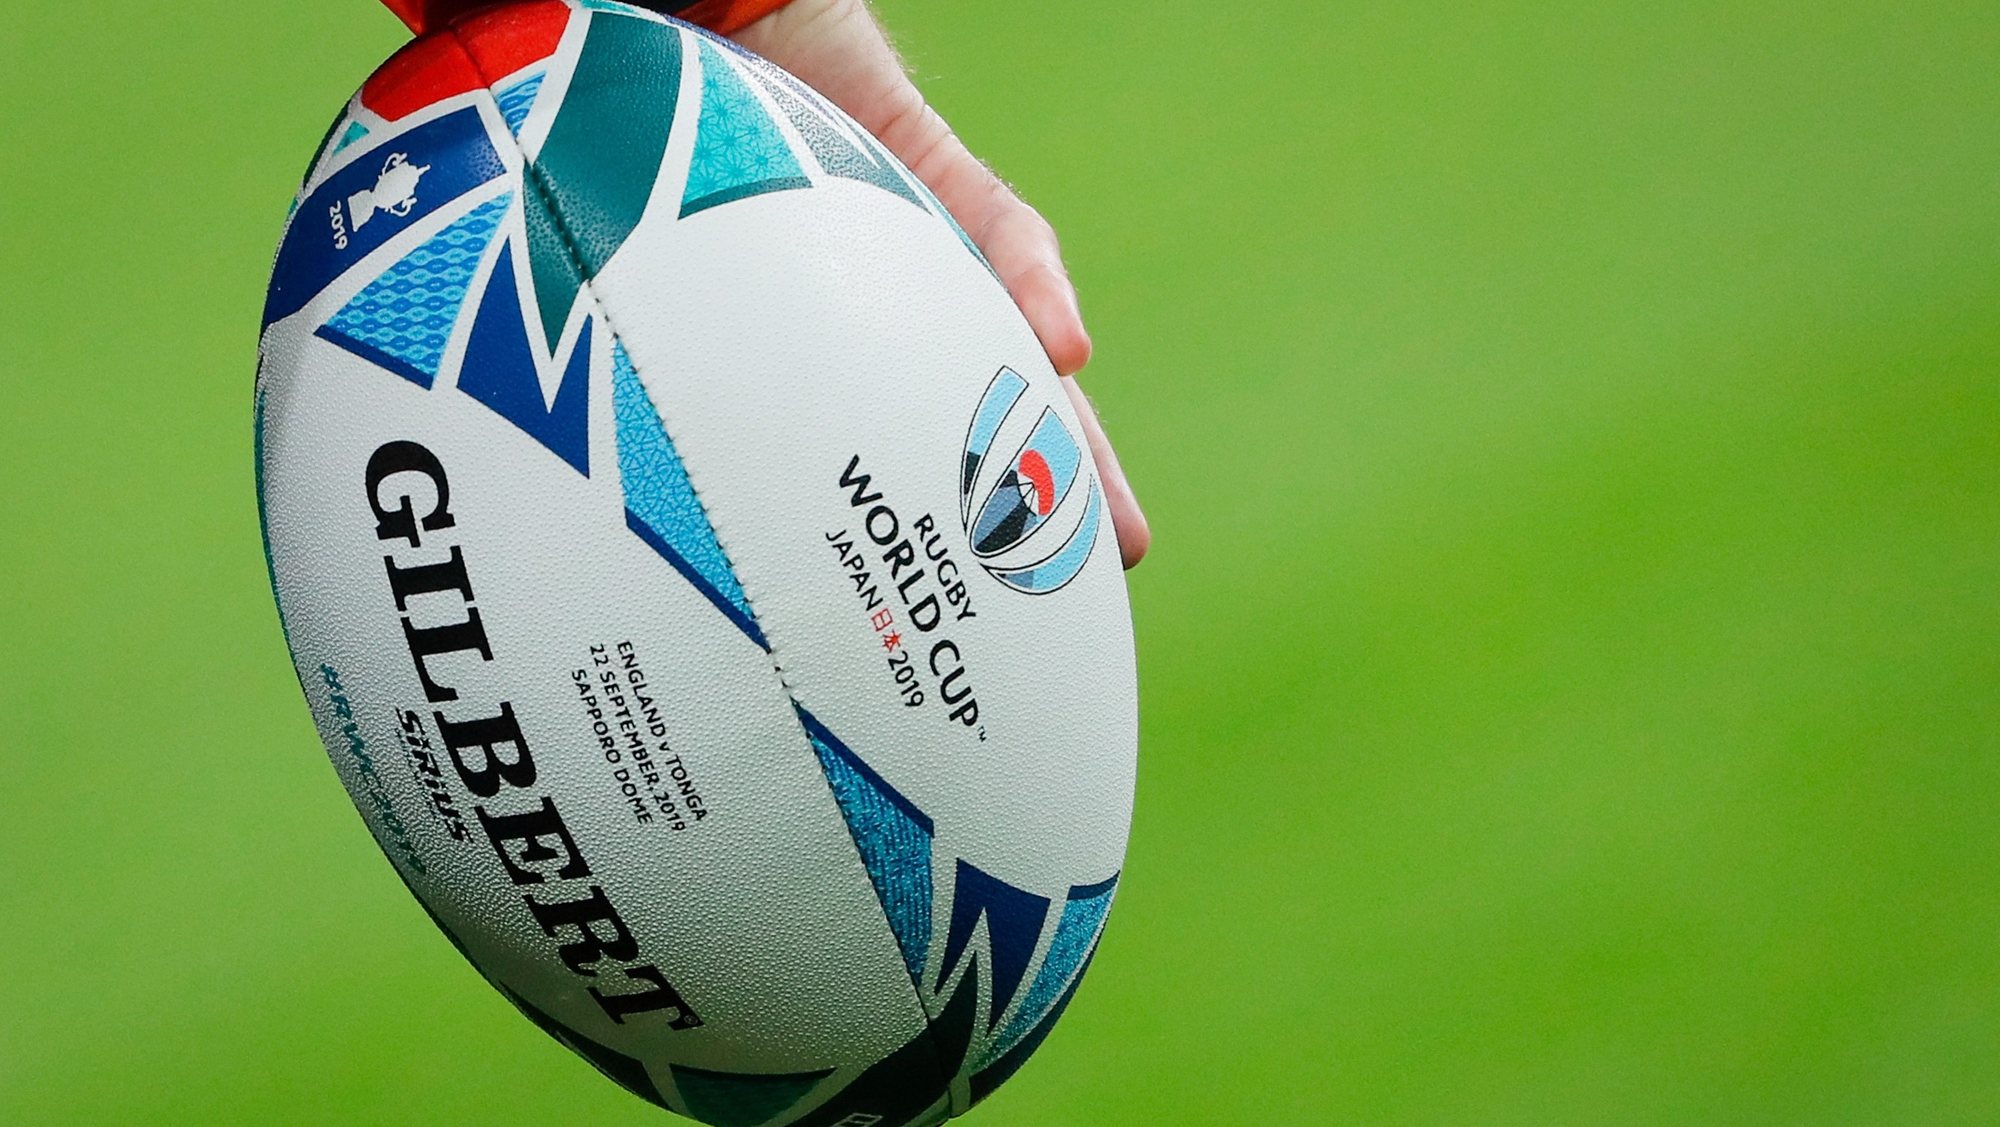 epa07855452 A details shot shows a player from Tonga holding a rugby ball during a training session ahead of the Rugby World Cup match between England and Tonga in Sapporo, Japan, 20 September 2019. The Rugby World Cup is being held in Japan and will run from 20 September to 02 November 2019.  EPA/MARK R. CRISTINO NO COMMERCIAL SALES / NOT USED IN ASSOCATION WITH ANY COMMERCIAL ENTITY  EDITORIAL USE ONLY/NO SALES